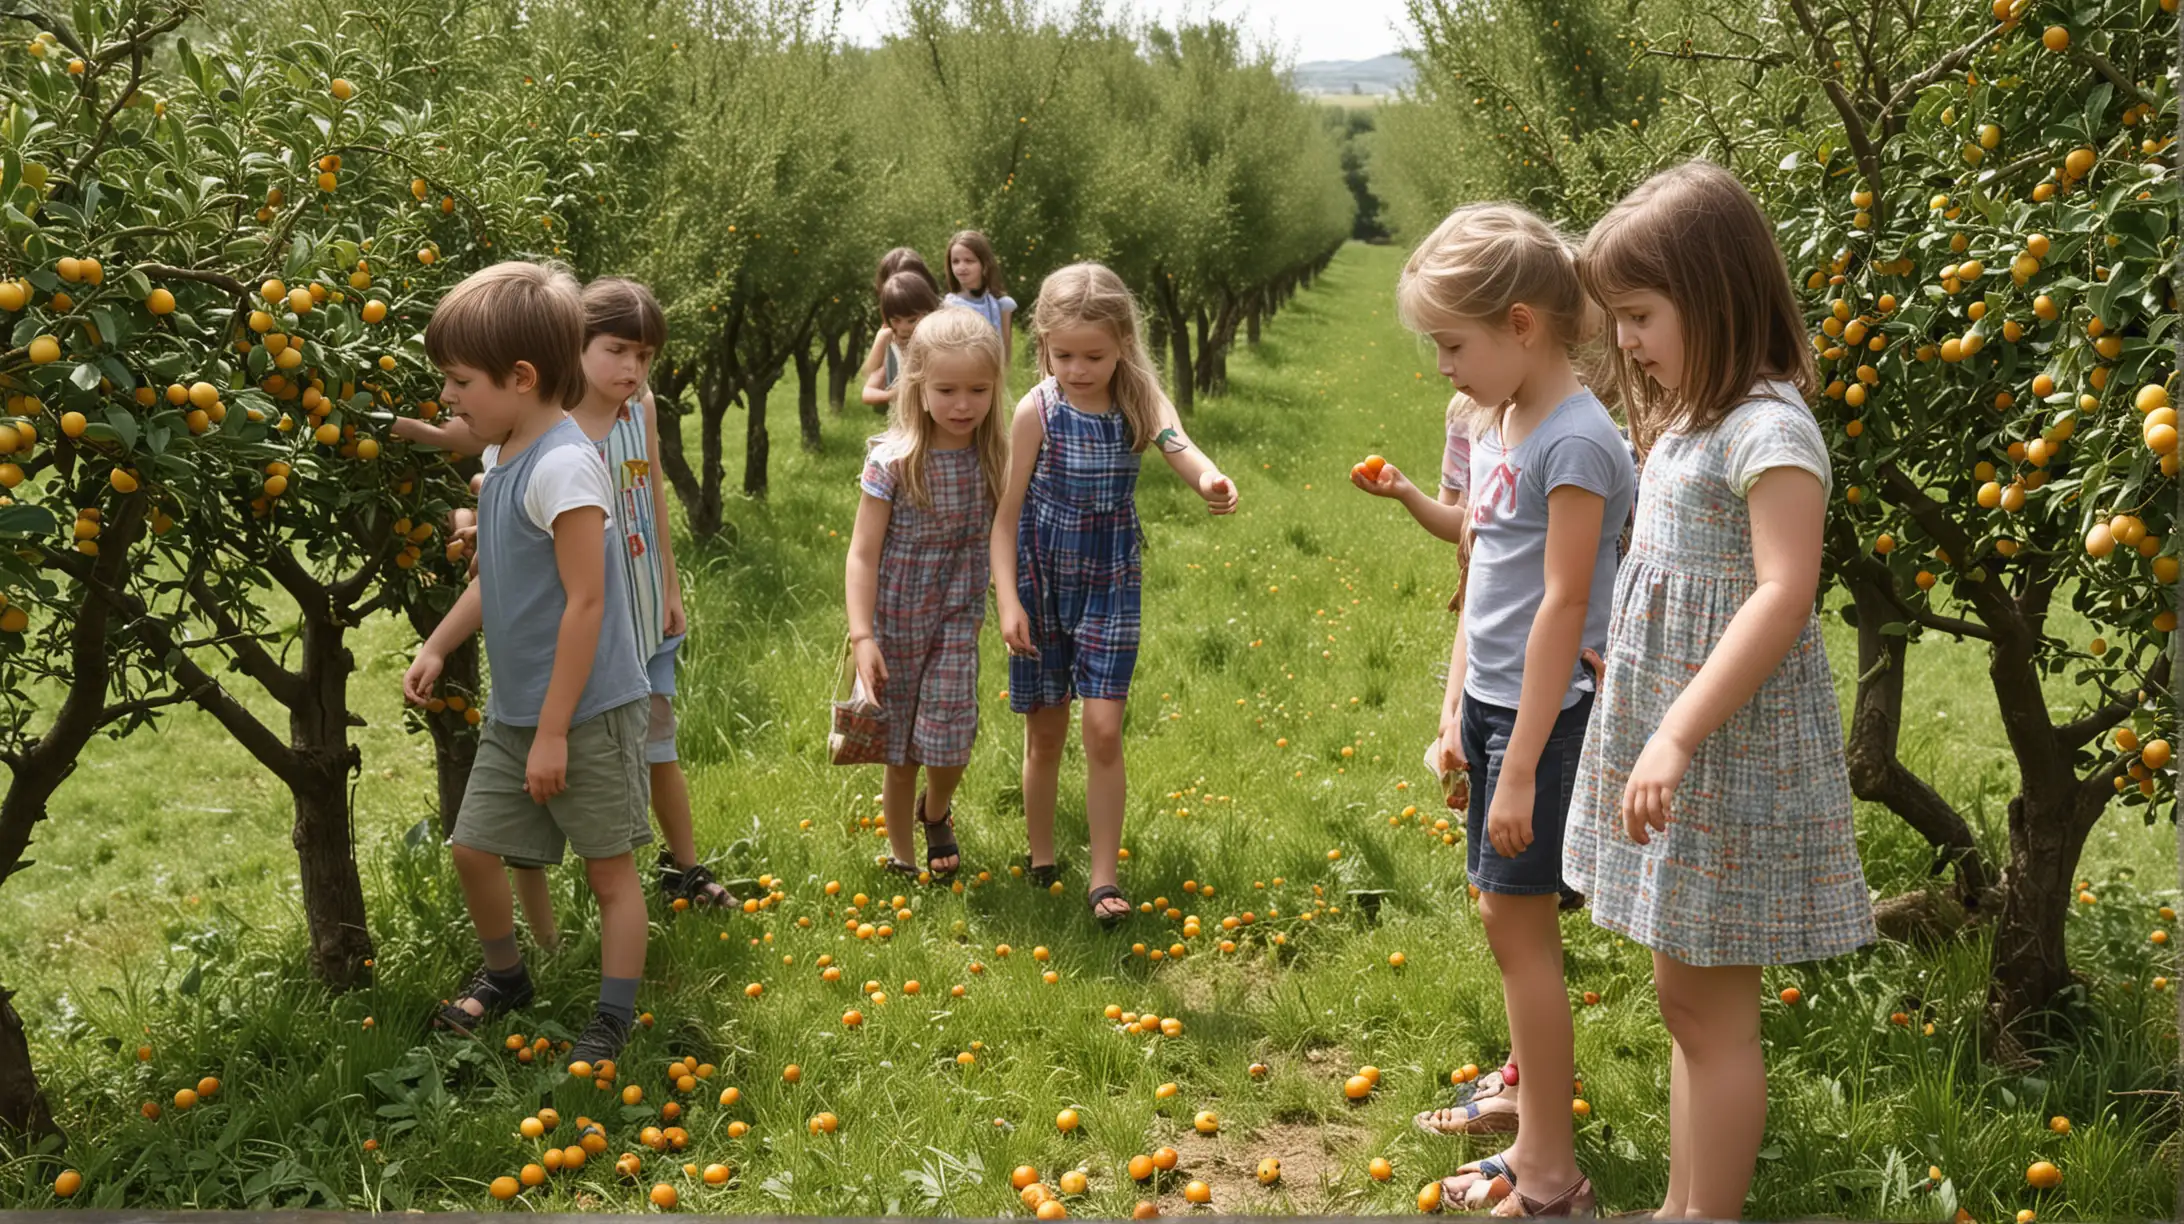 Children Harvesting Mirabelles in a Sunny Orchard